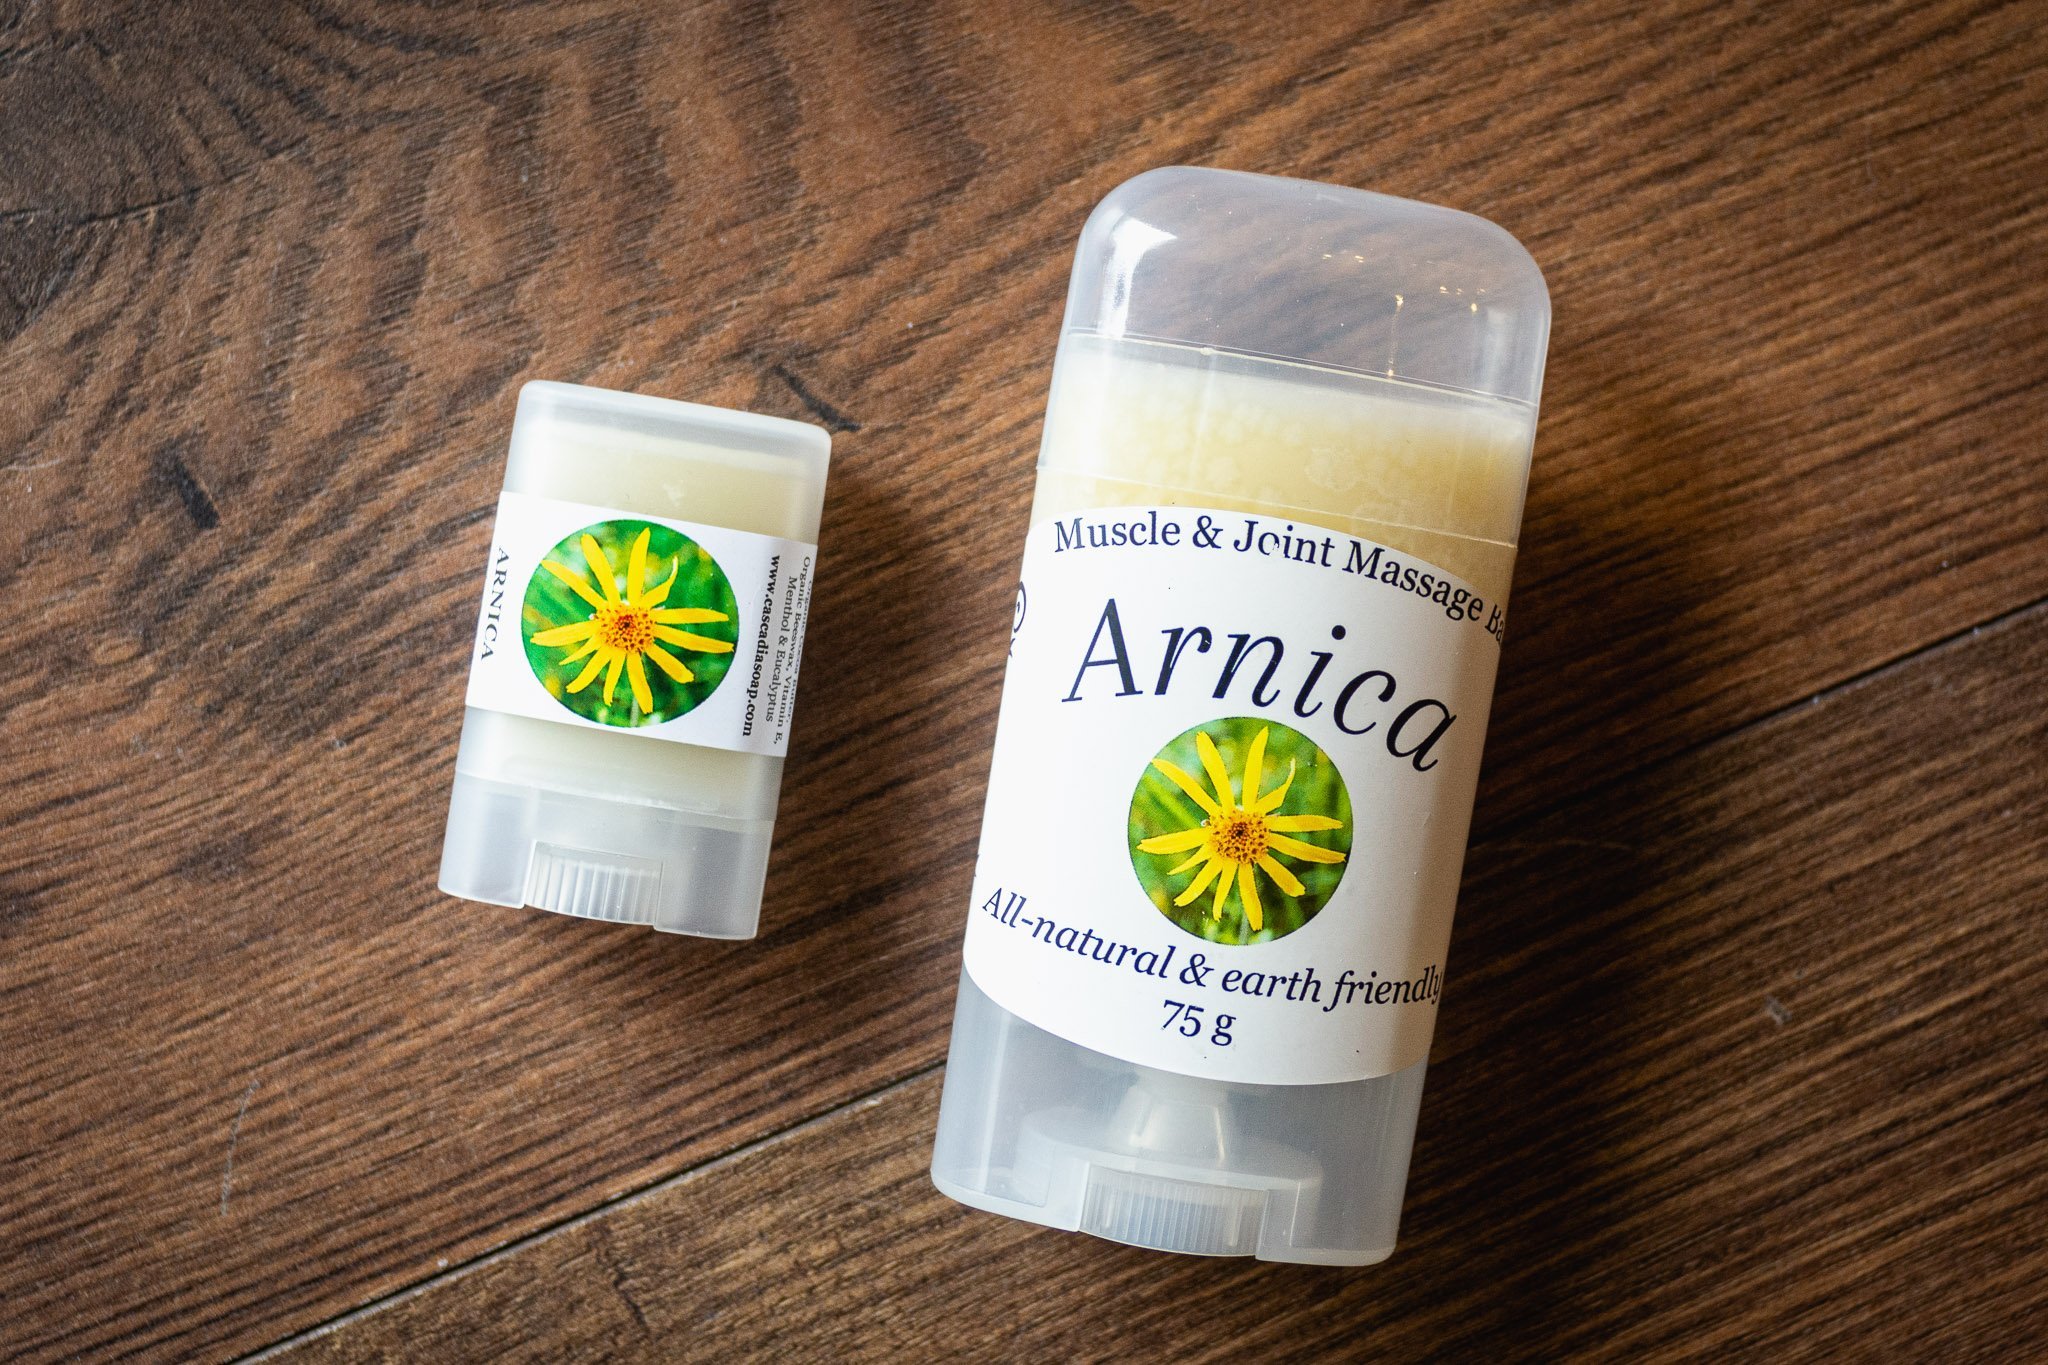 Arnica Muscle & Joint Massage Bar by Cascadia Skincare